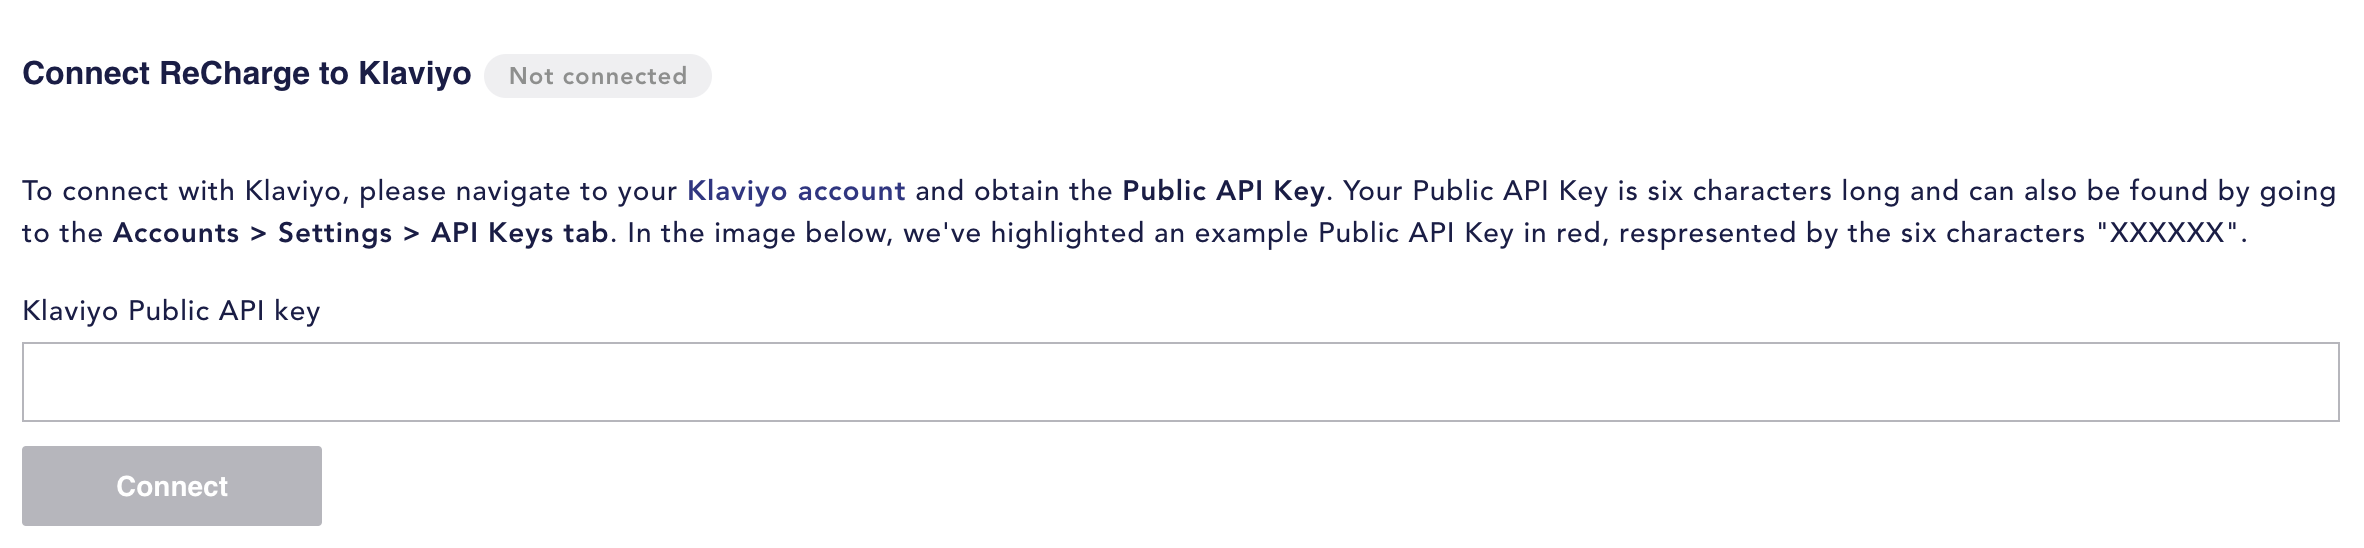 Add_Public_API_Key_to_Recharge.png